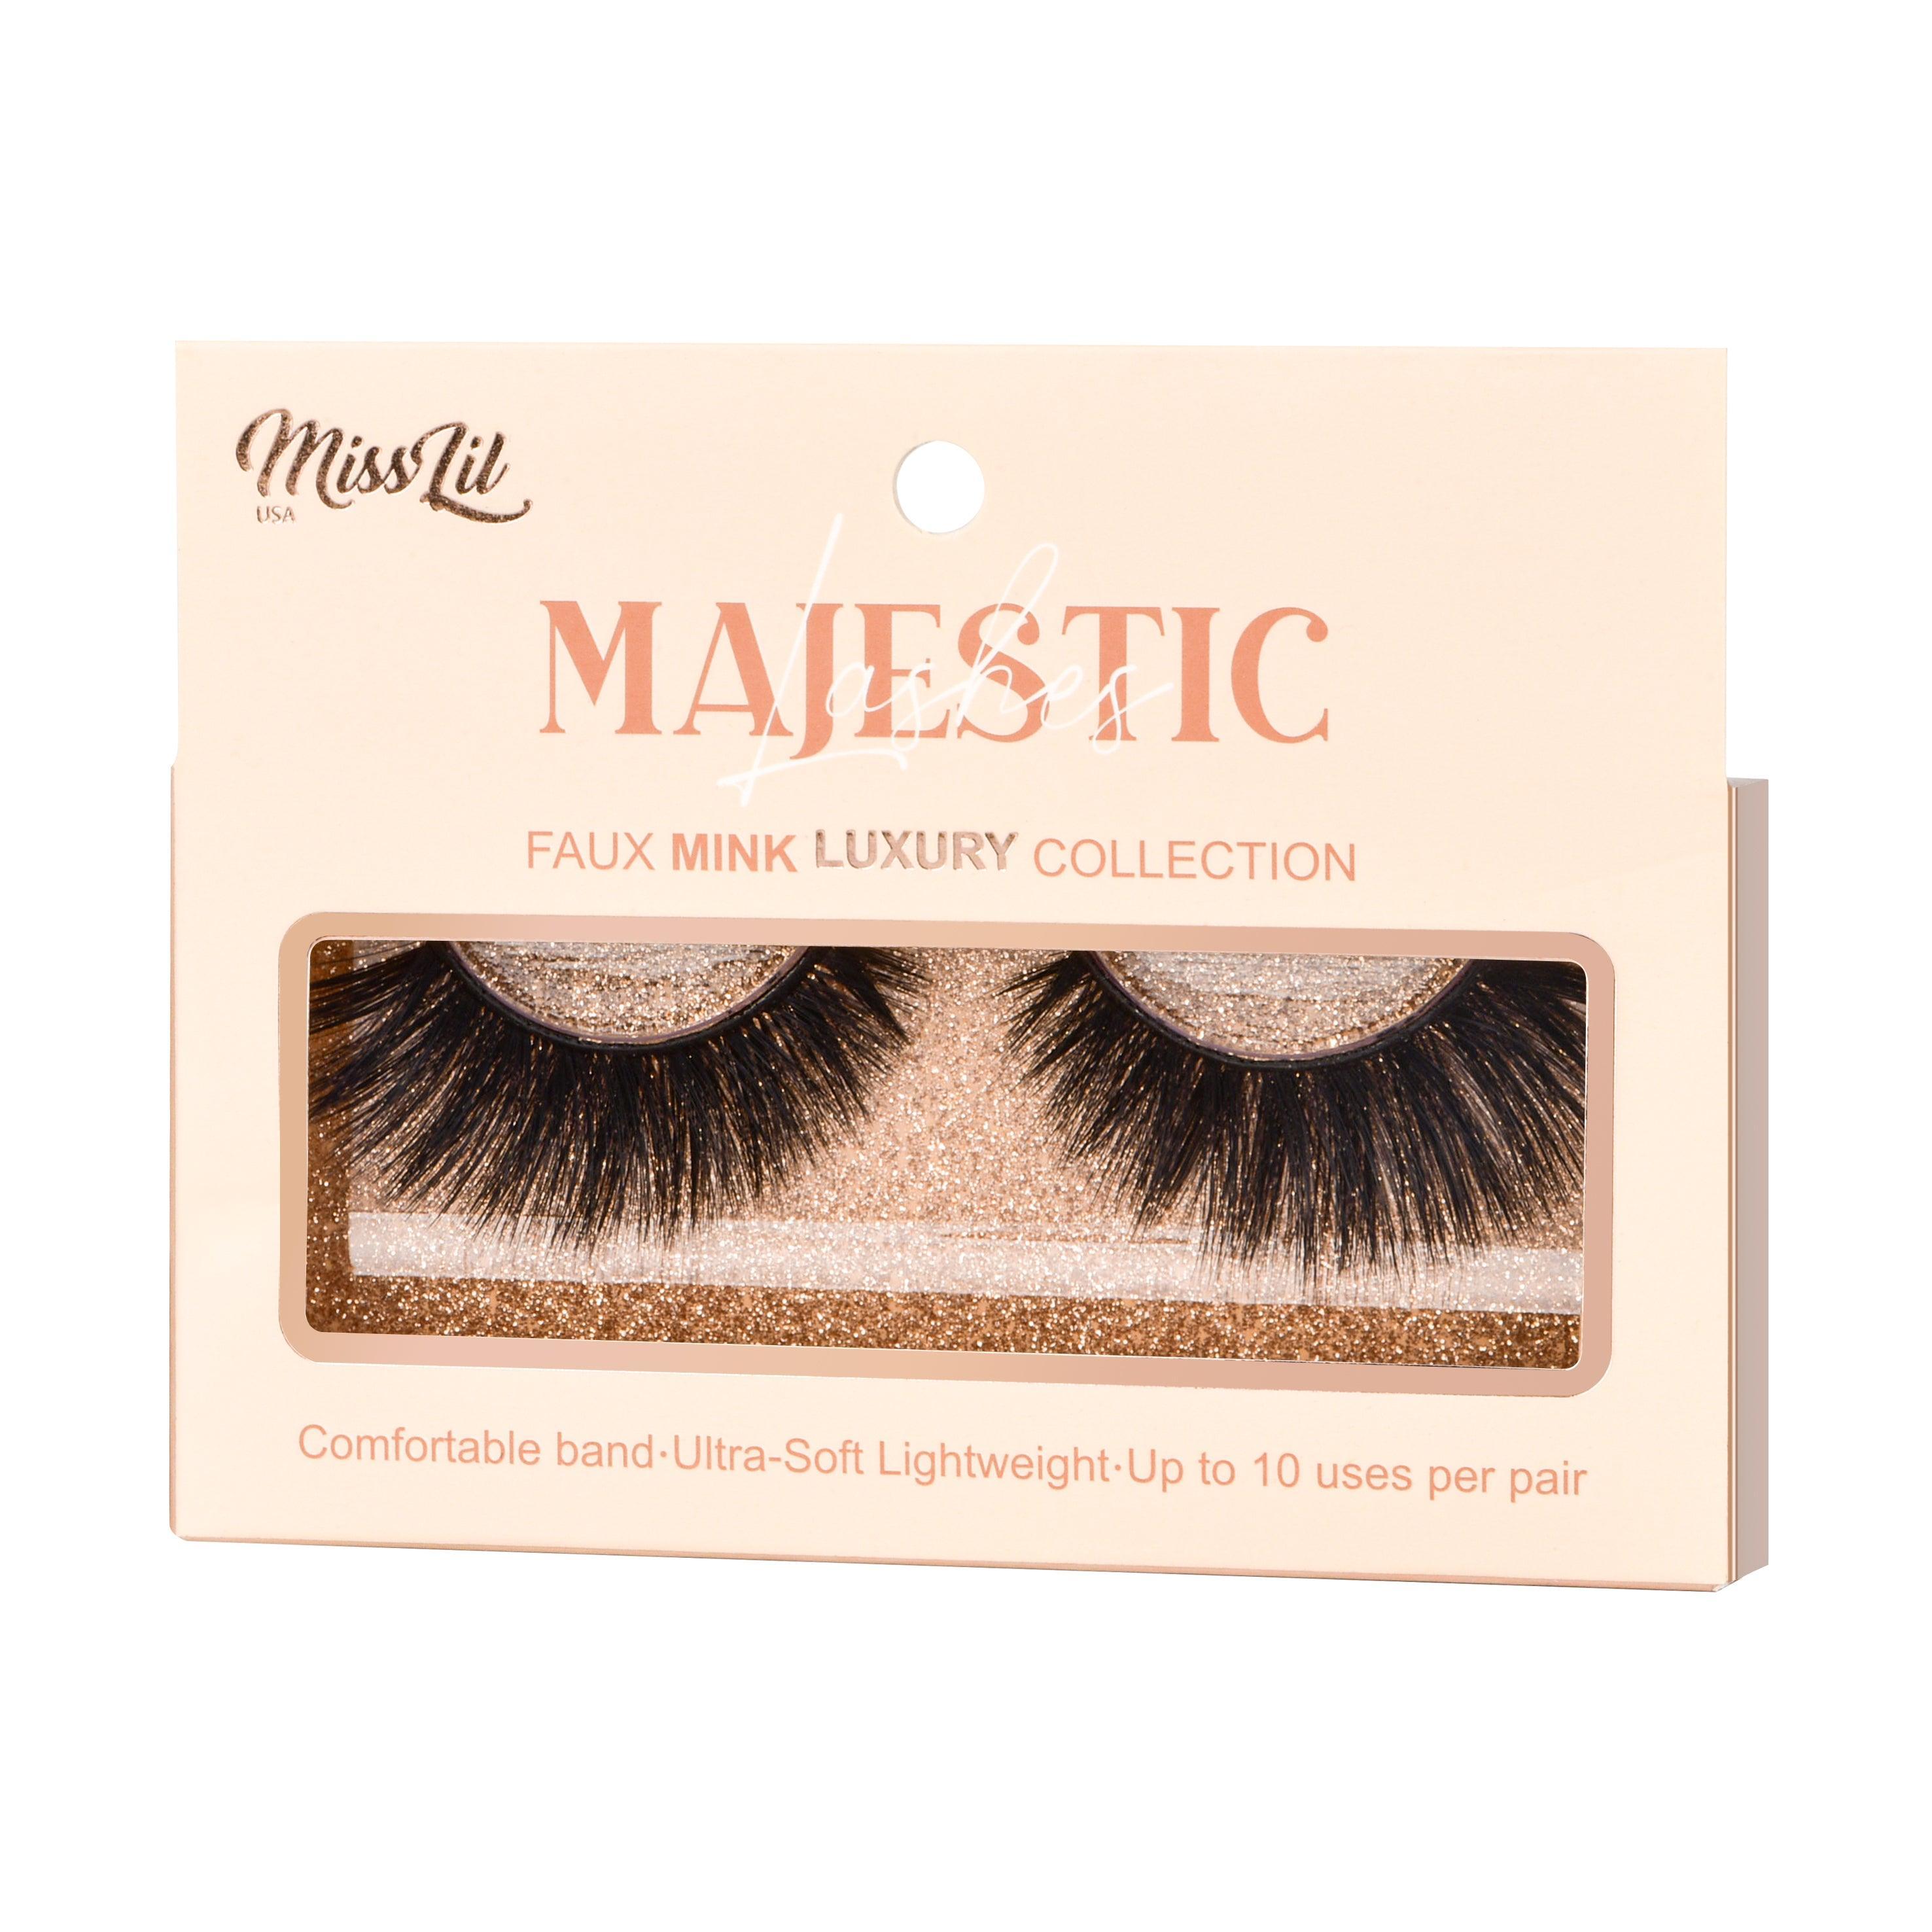 Majestic Collection 14 fake lashes -  Miss Lil USA Wholesale